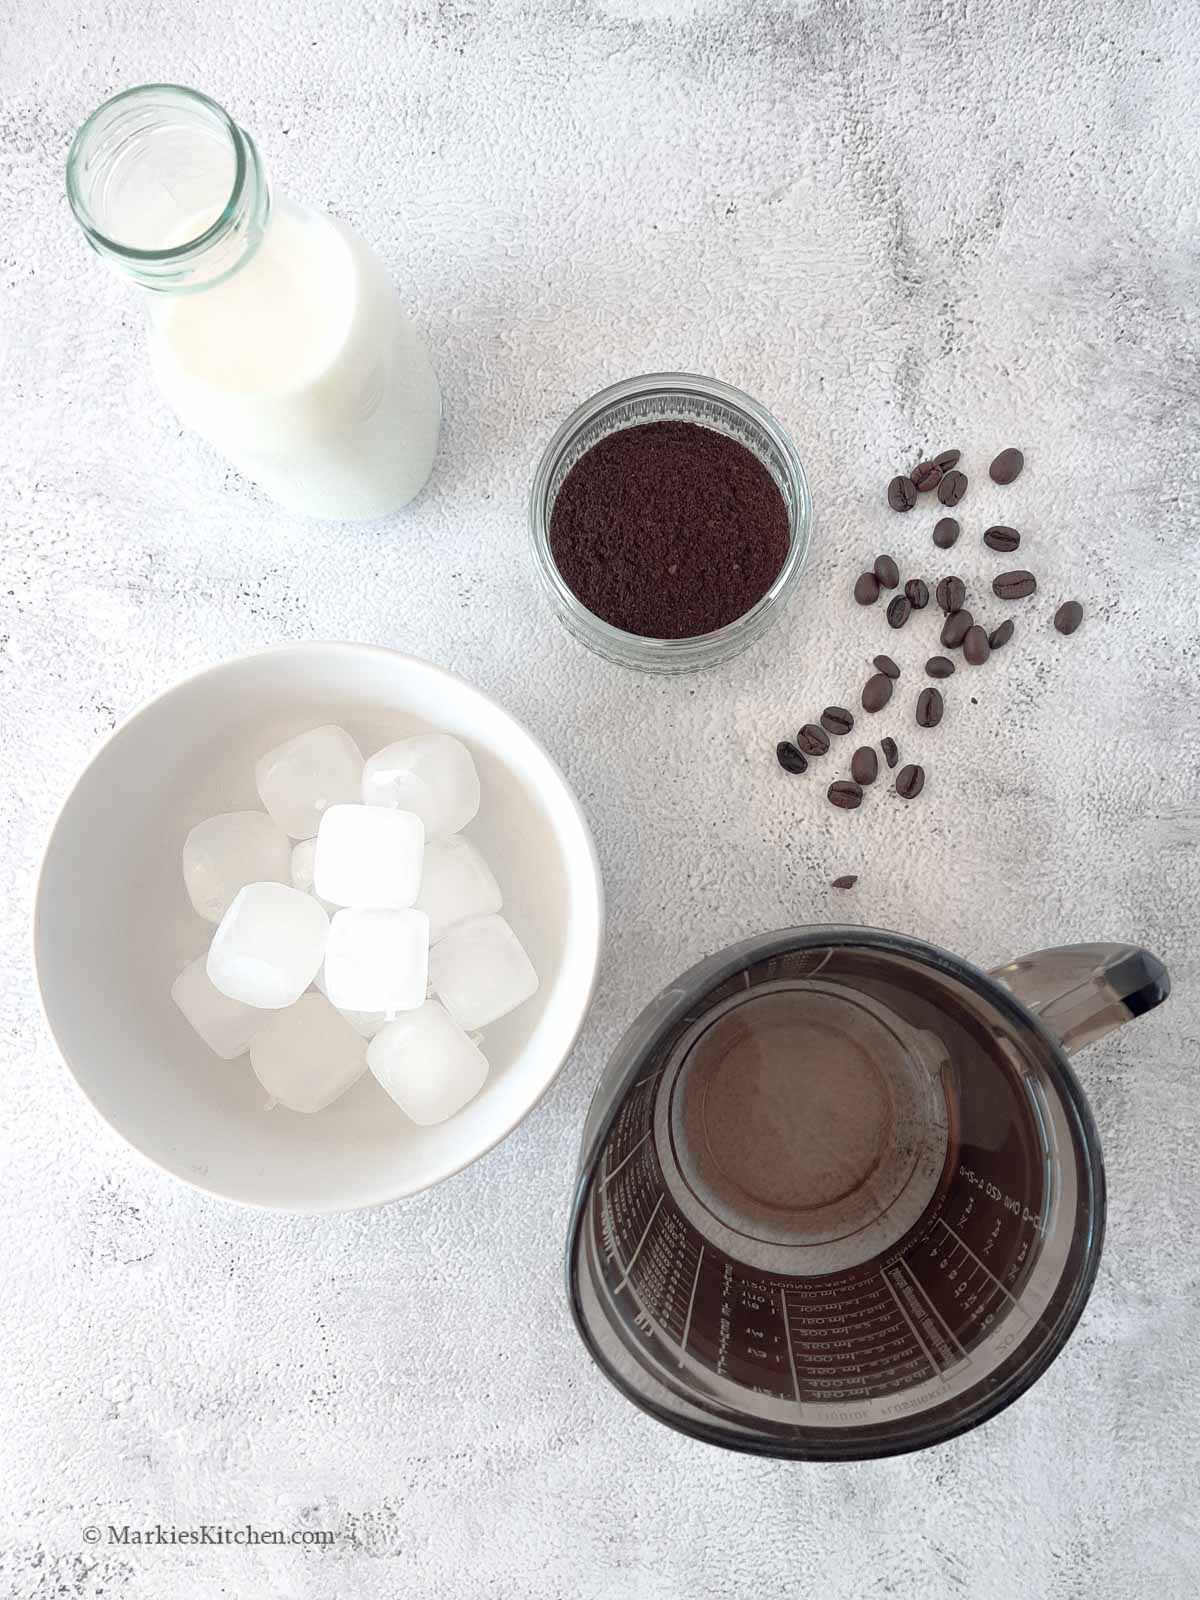 A photo of ingredients for making an iced coffee: a bowl with ground coffee, a jug of water, a jar of milk and a bowl of ice cubes.